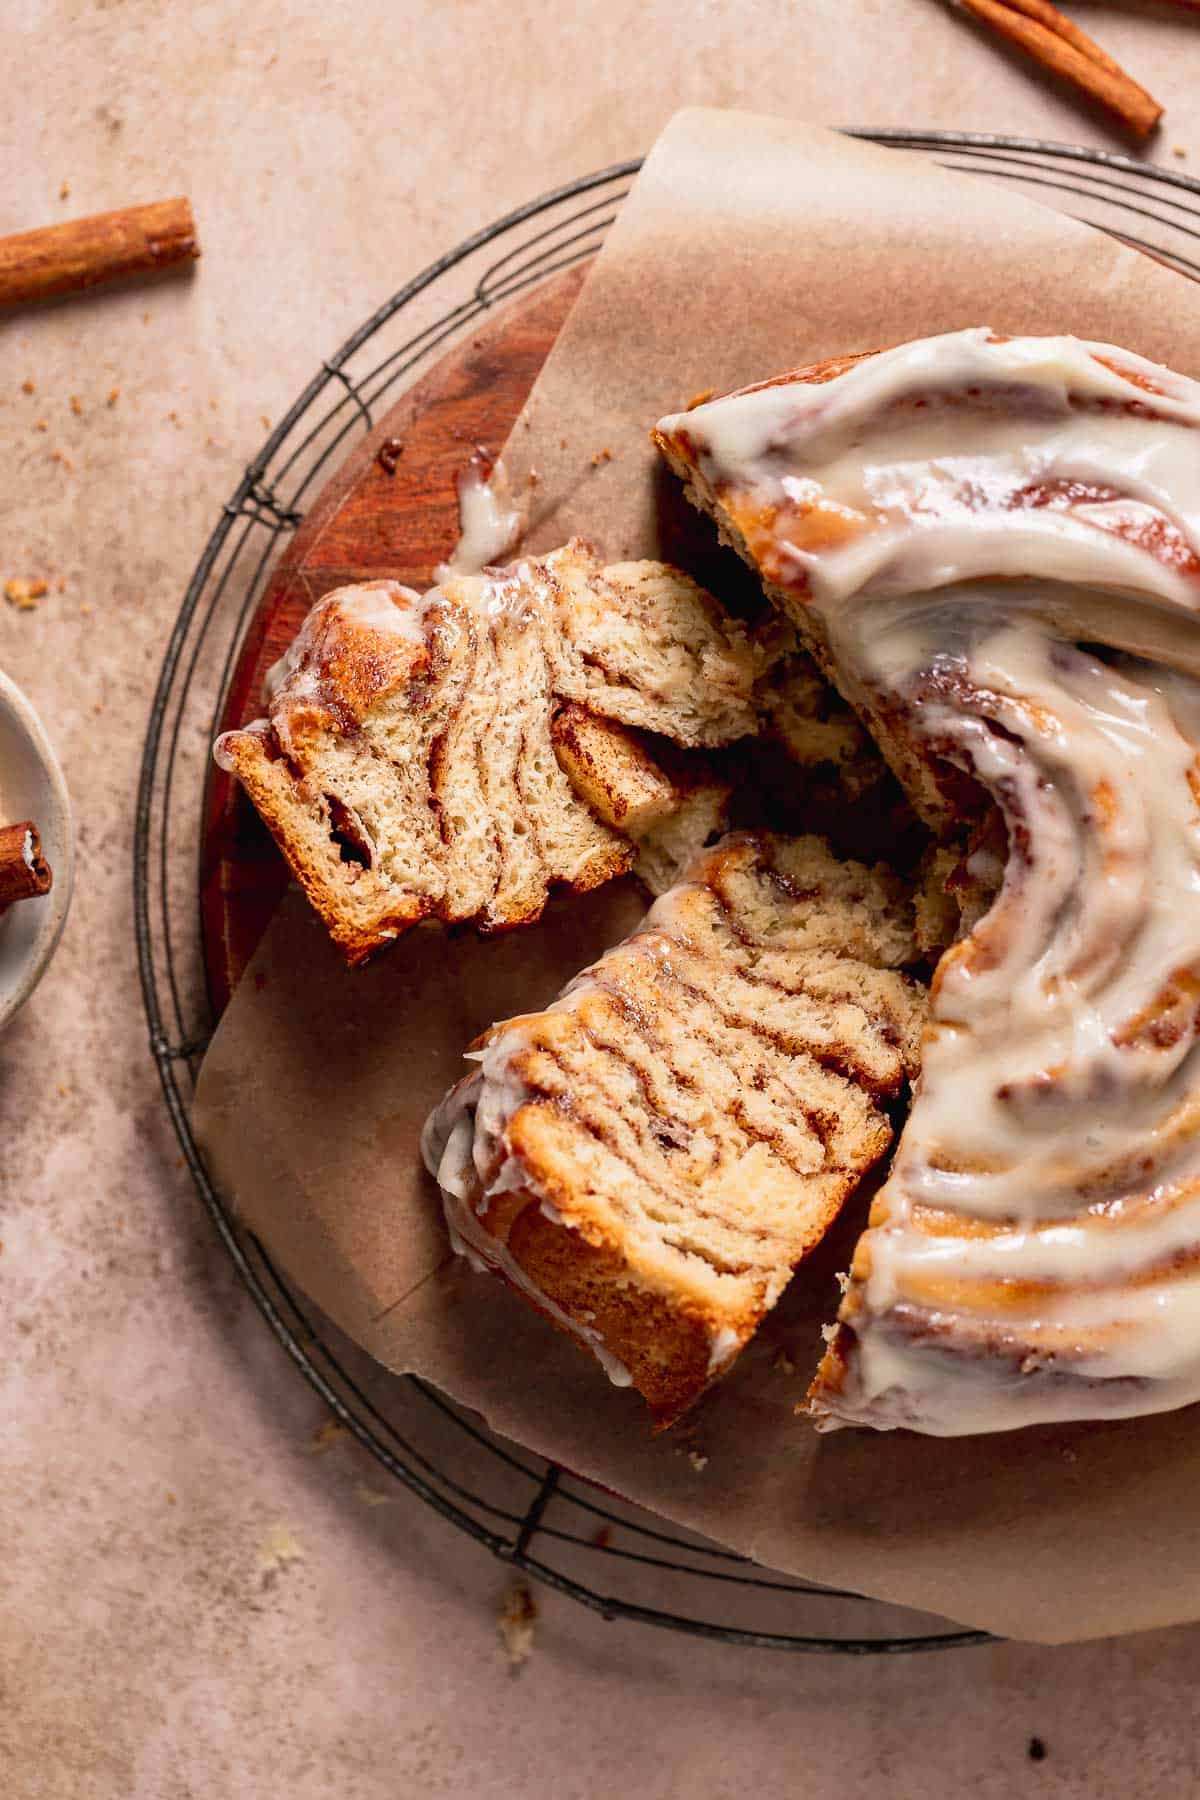 Cinnamon roll cake slices on a wooden cake board on their side to show the cinnamon swirl texture.